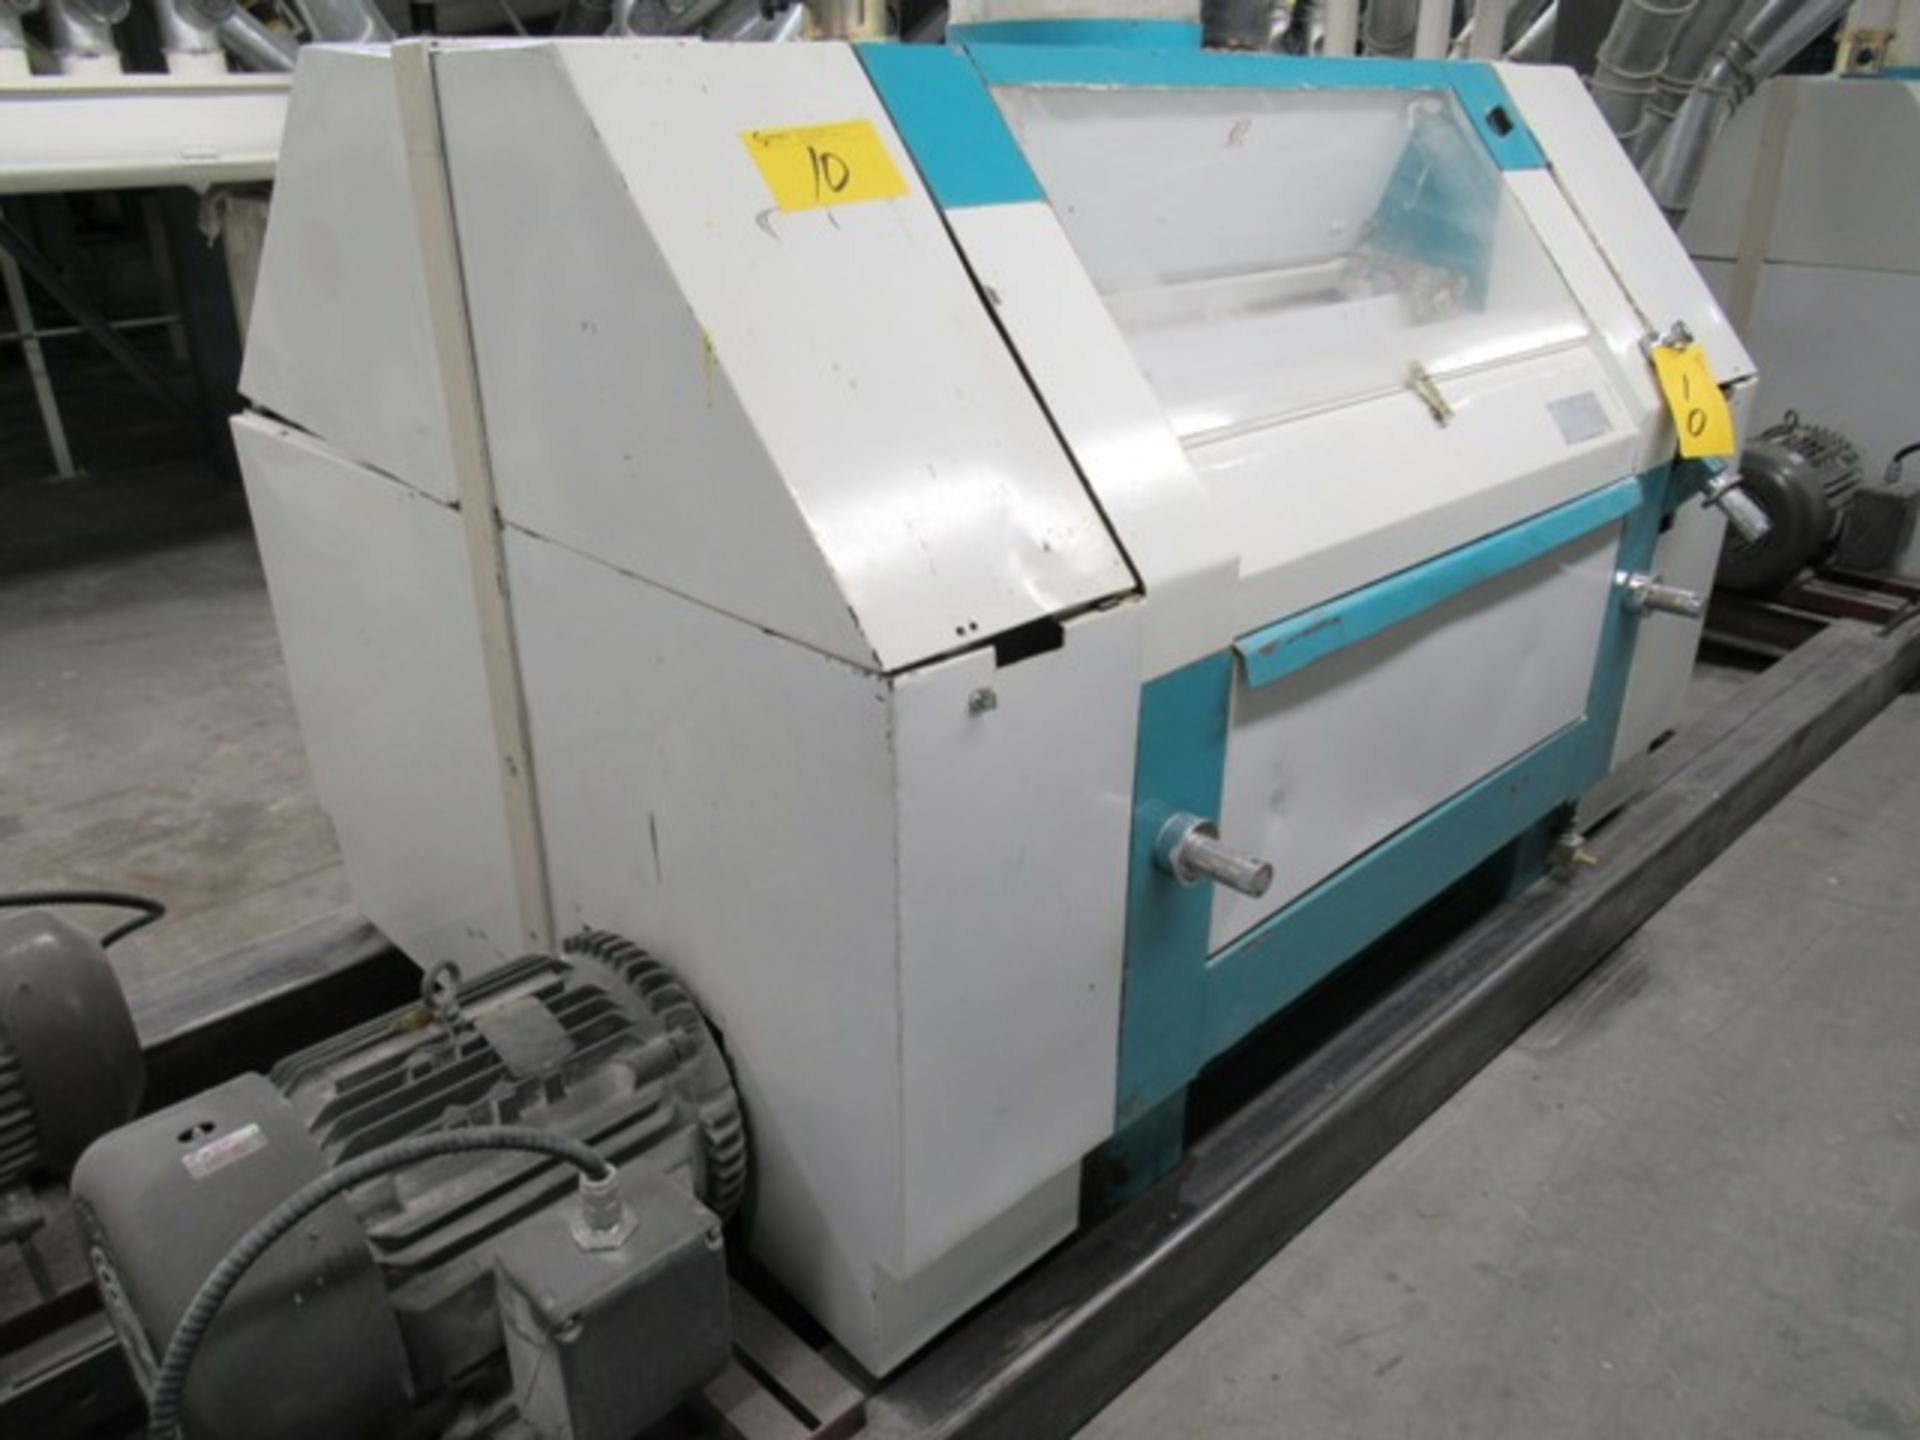 2001 INDOPOL MM-1PRM04, 40"X10" APPROX. DOUBLE ROLLER GRINDING MILL, 1 - 20 HP, 1 - 15 HPMOTORS S/N: